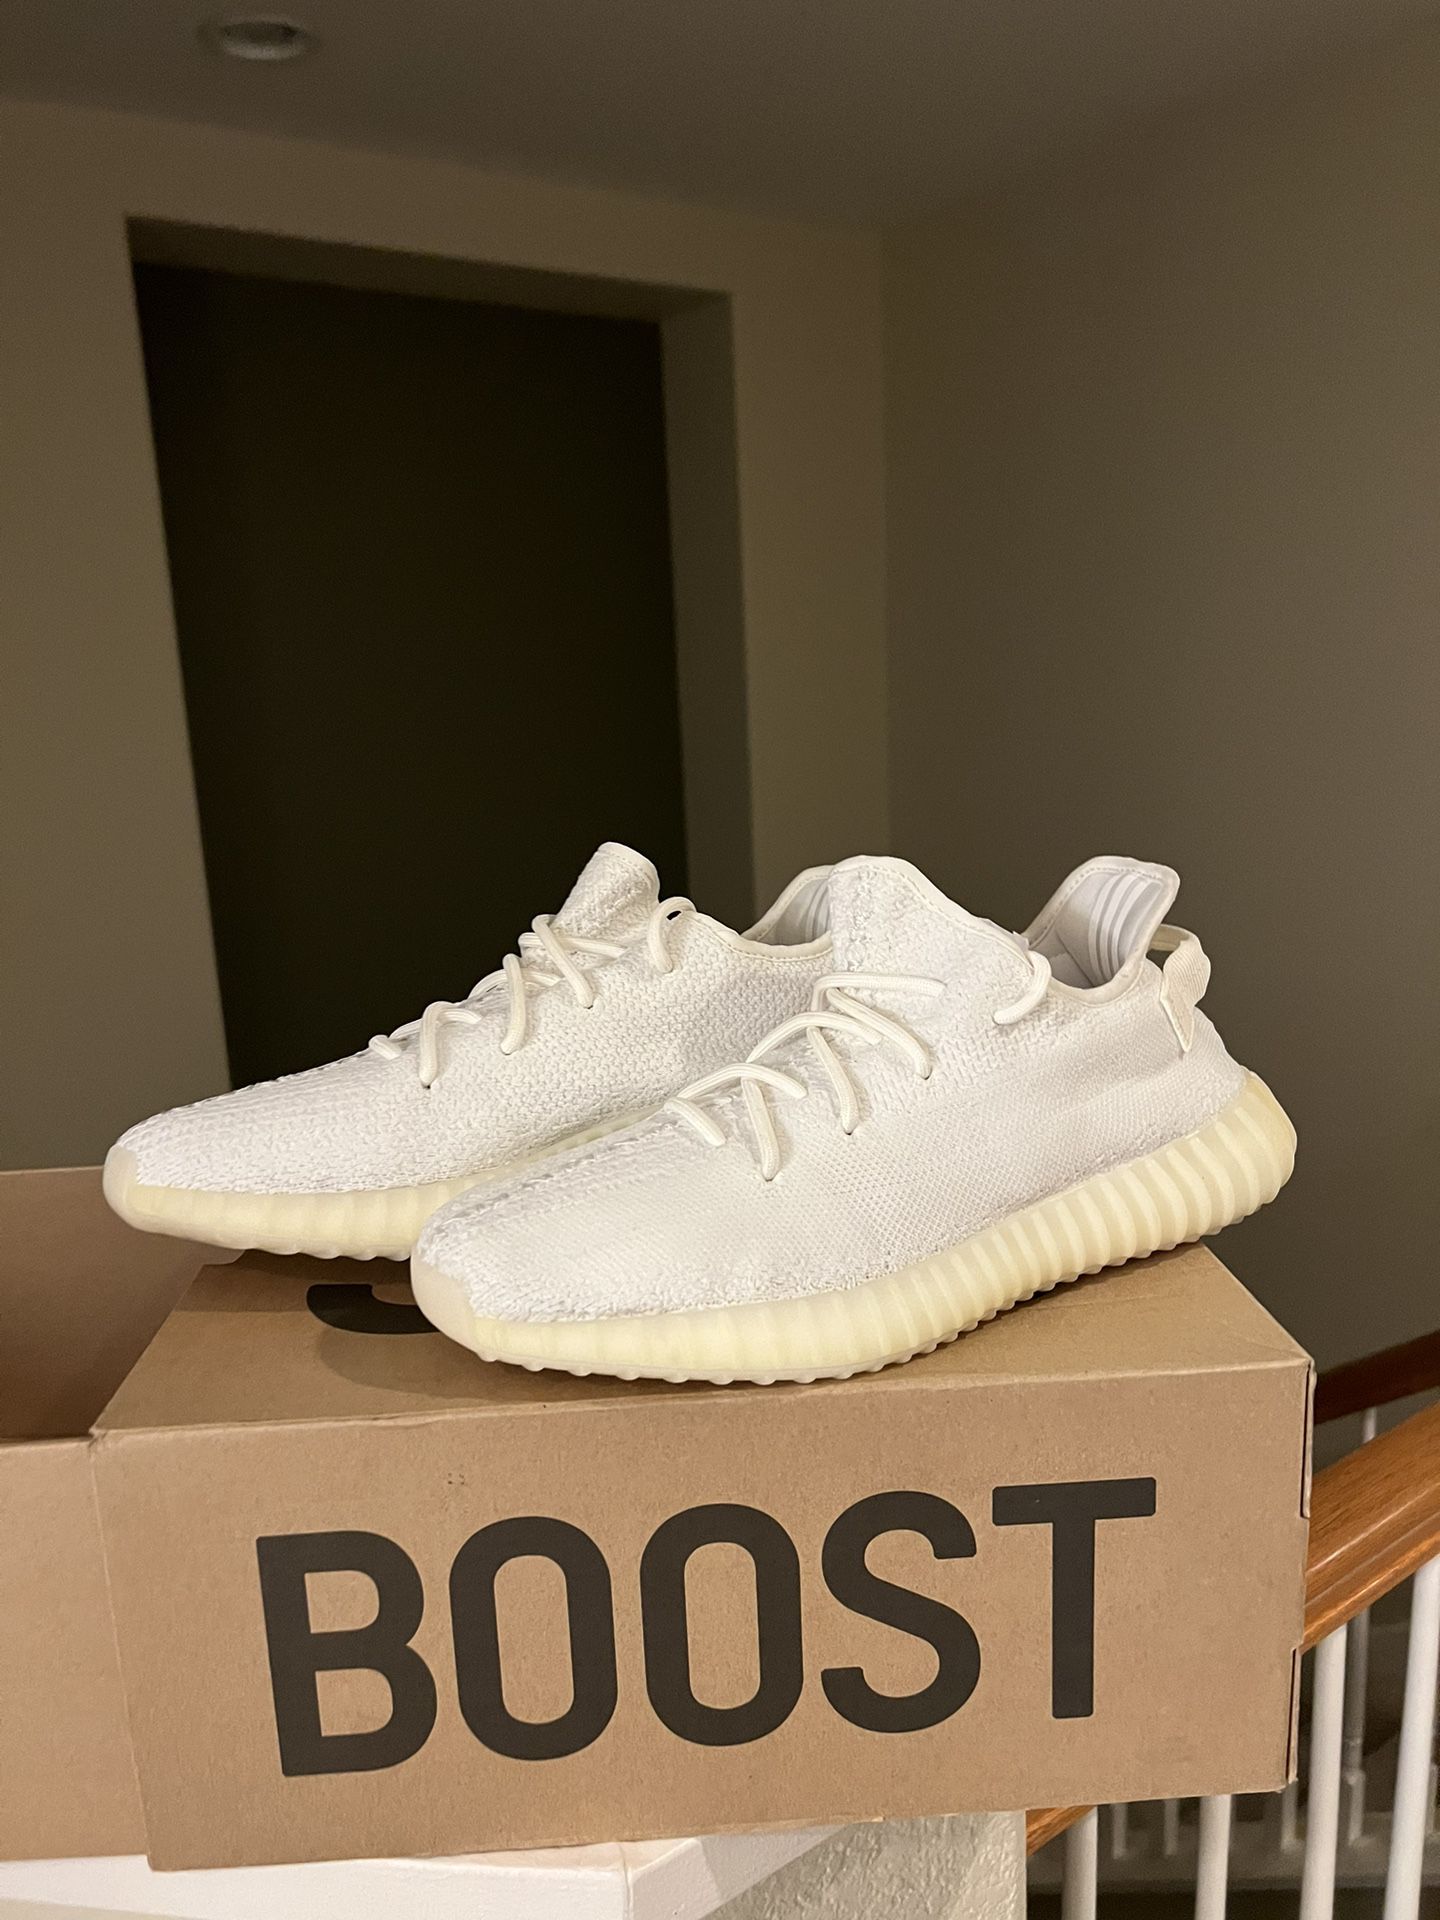 Yeezys Triple White Cream Sz 10.5. Buy Pr Shoes Get Free Supreme T shirt Sz  L for Sale in San Diego, CA - OfferUp